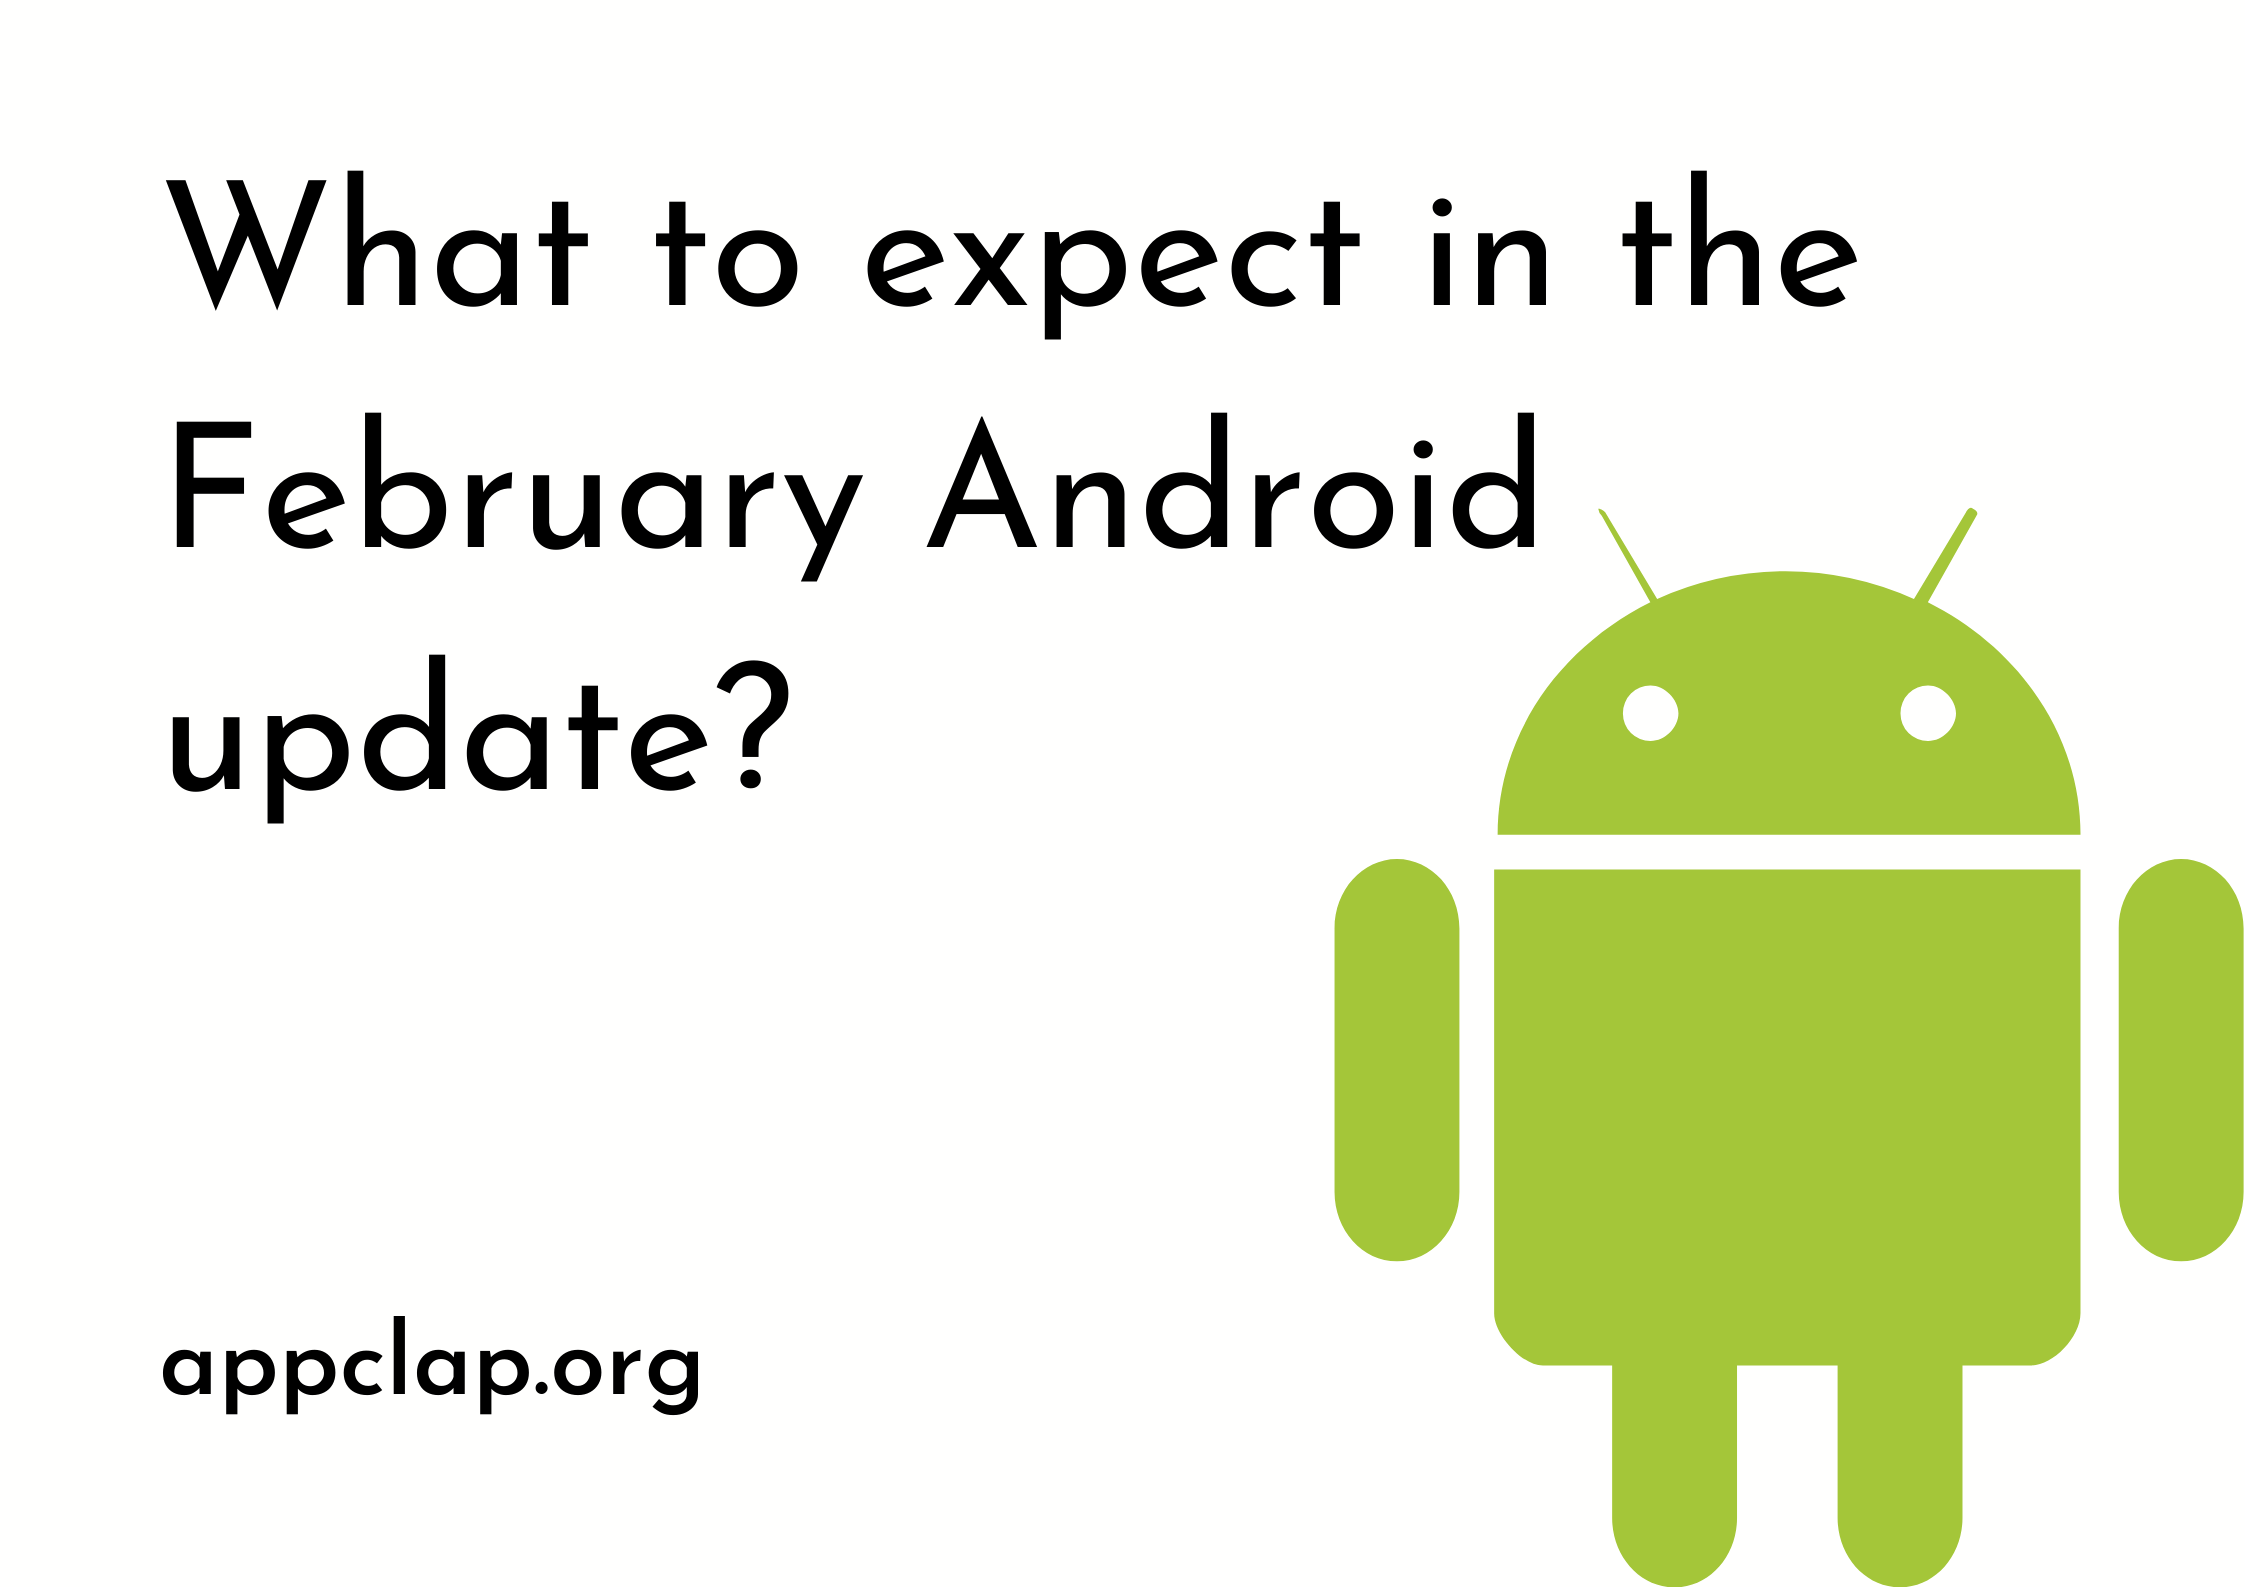 What to expect in the February Android update?